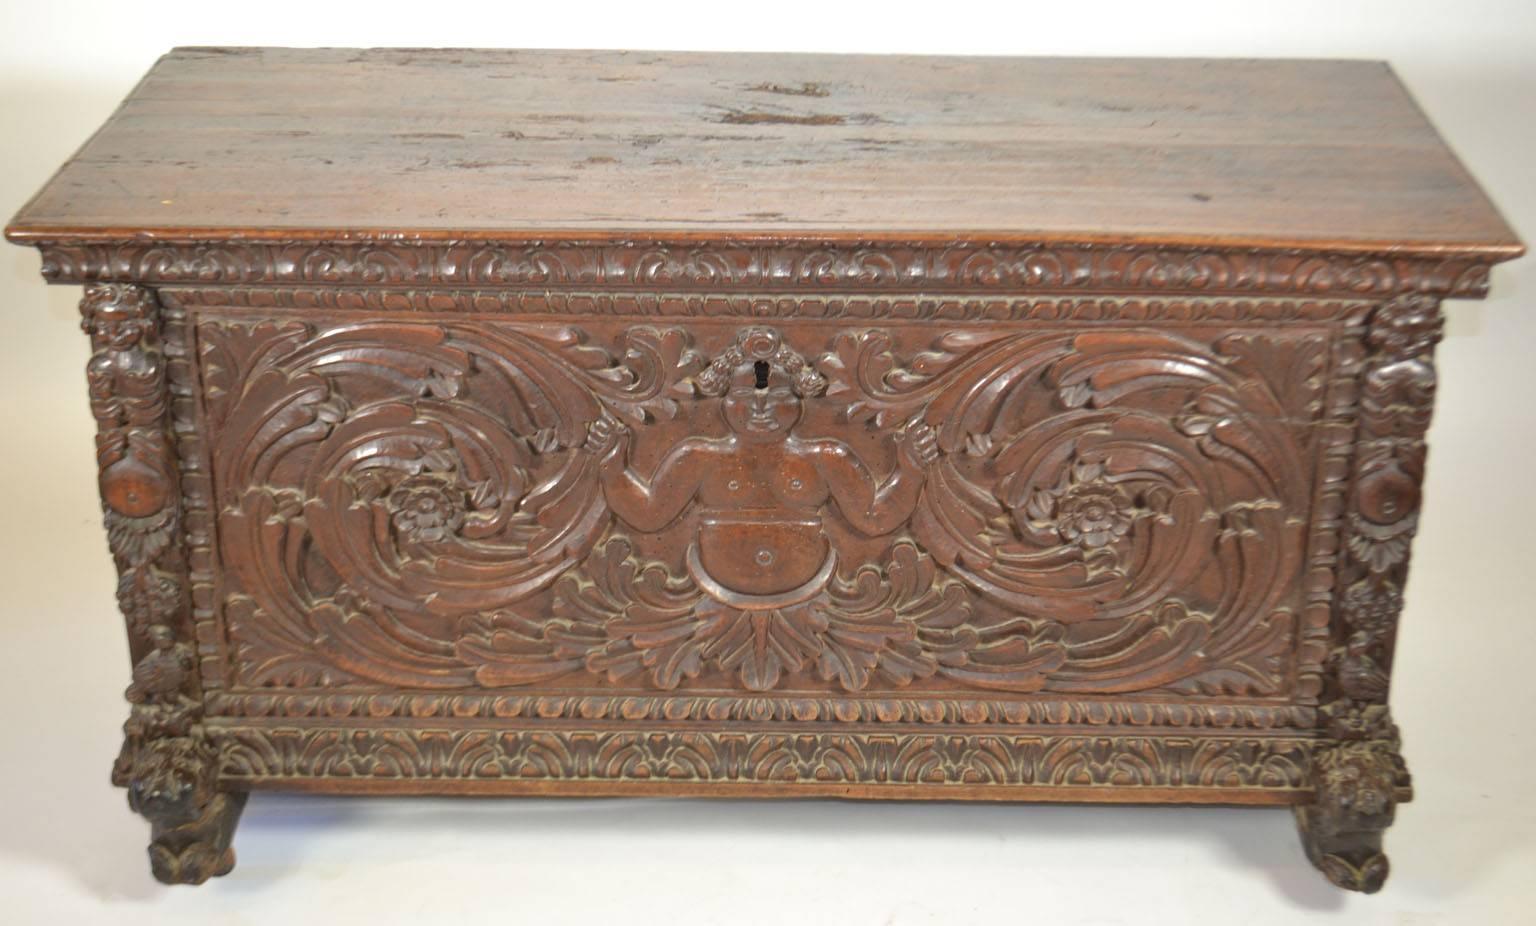 A continental carved walnut chest in the Renaissance taste, 18th century, probably Italian, the lid opens to a void interior. The case is carved with figures, acanthus scrolls and foliate moldings on anthropomorphic feet, casters.